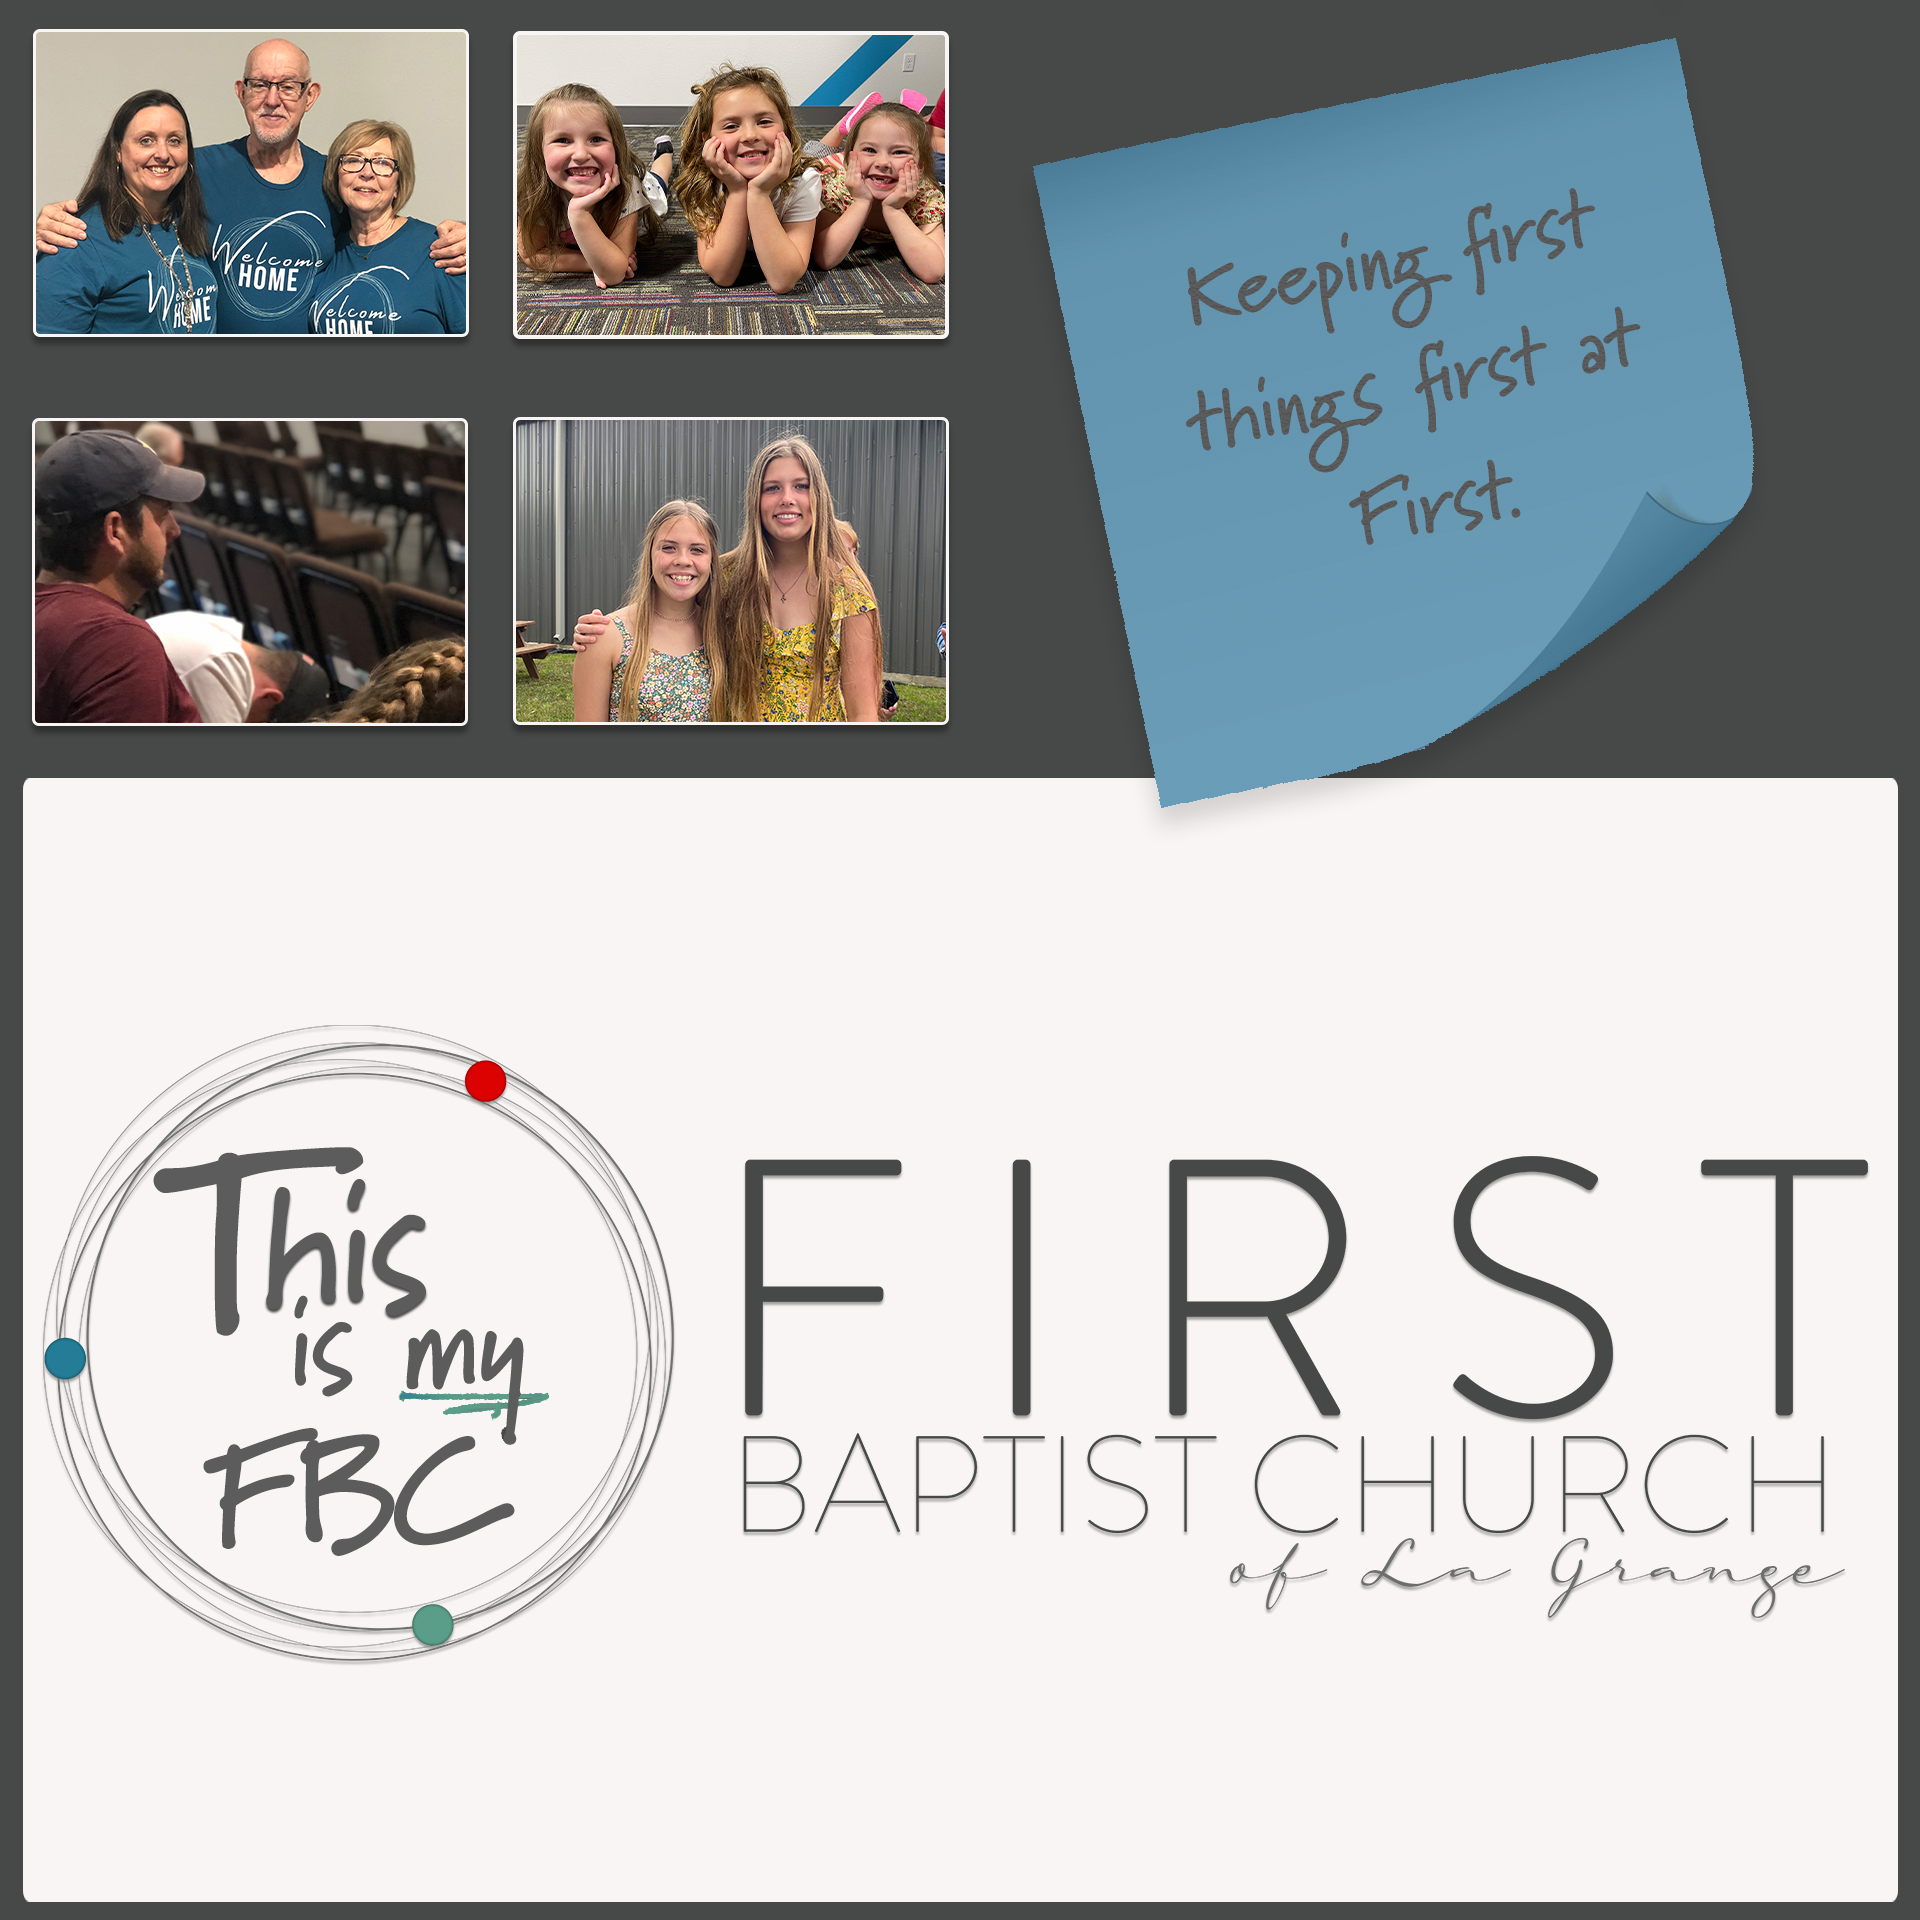 This is My FBC